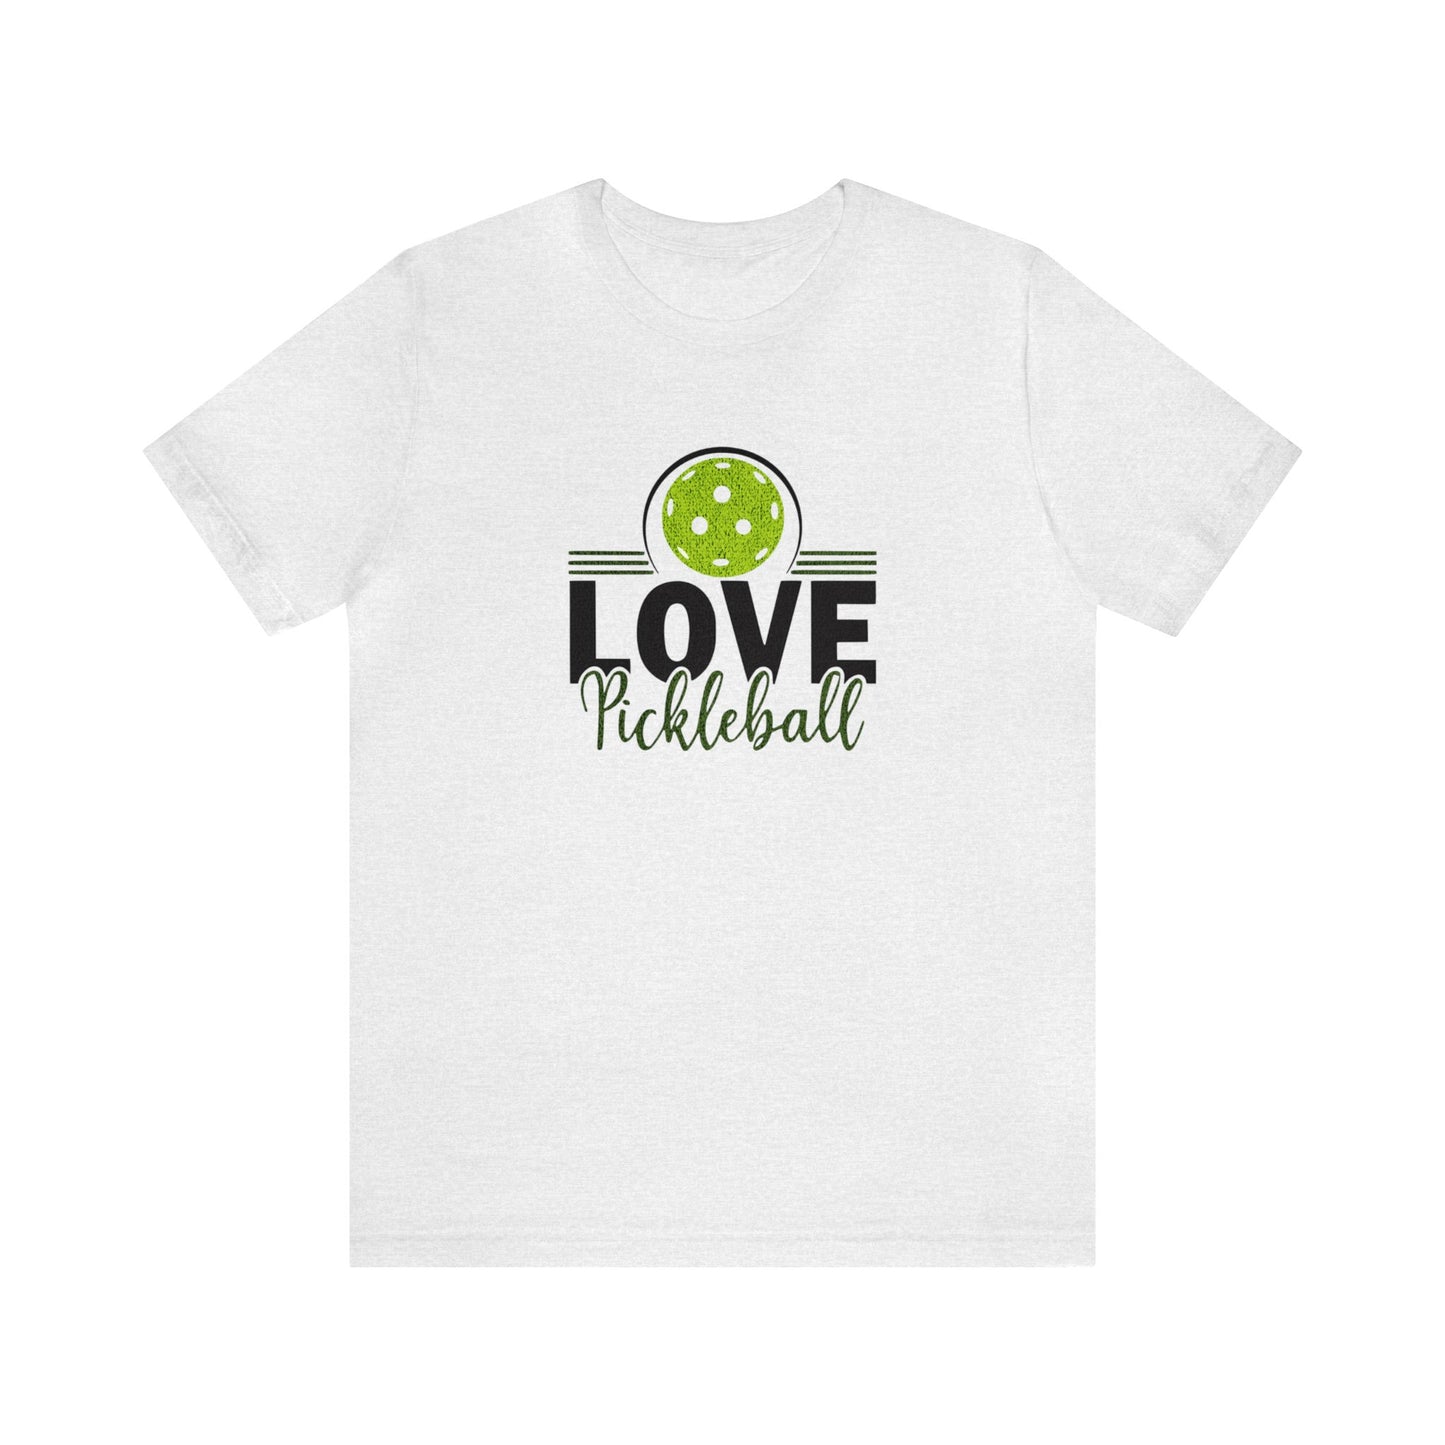 "Love Pickleball" - Premium T-Shirt Players and Fans